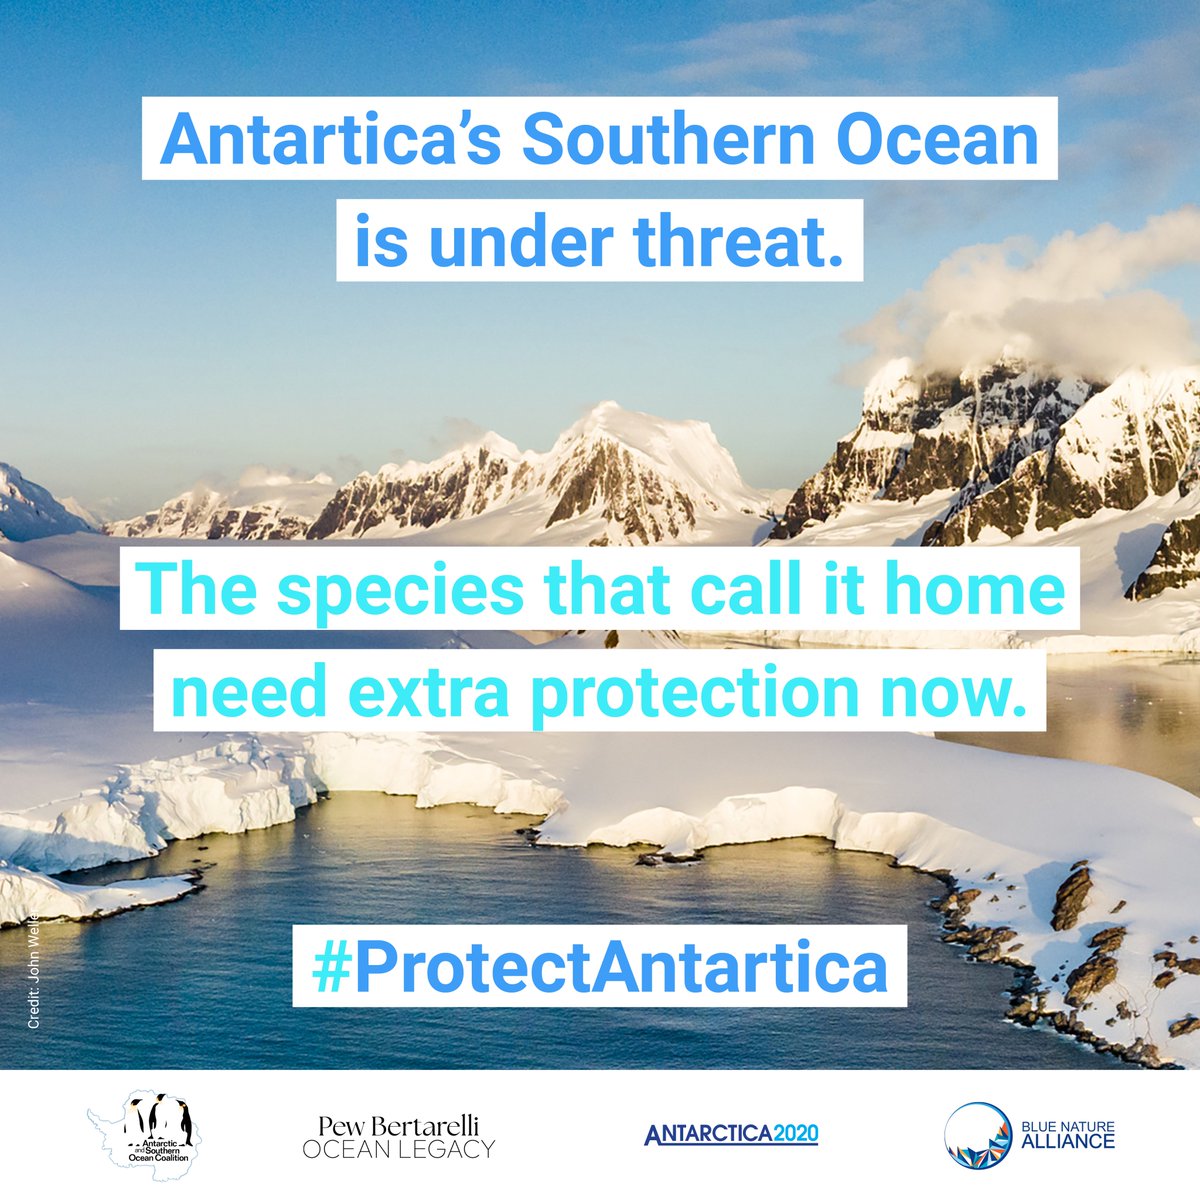 🗓️#CCAMLR42 officials are gathering in #Hobart from 16-27 of October to discuss the protection of Antarctica’s #SouthernOcean. For the second time this year that #CCAMLR has an opportunity to progress the adoption of large-scale #MPAs 🇦🇶 #PBOL #PewBertarelliOceanLegacy